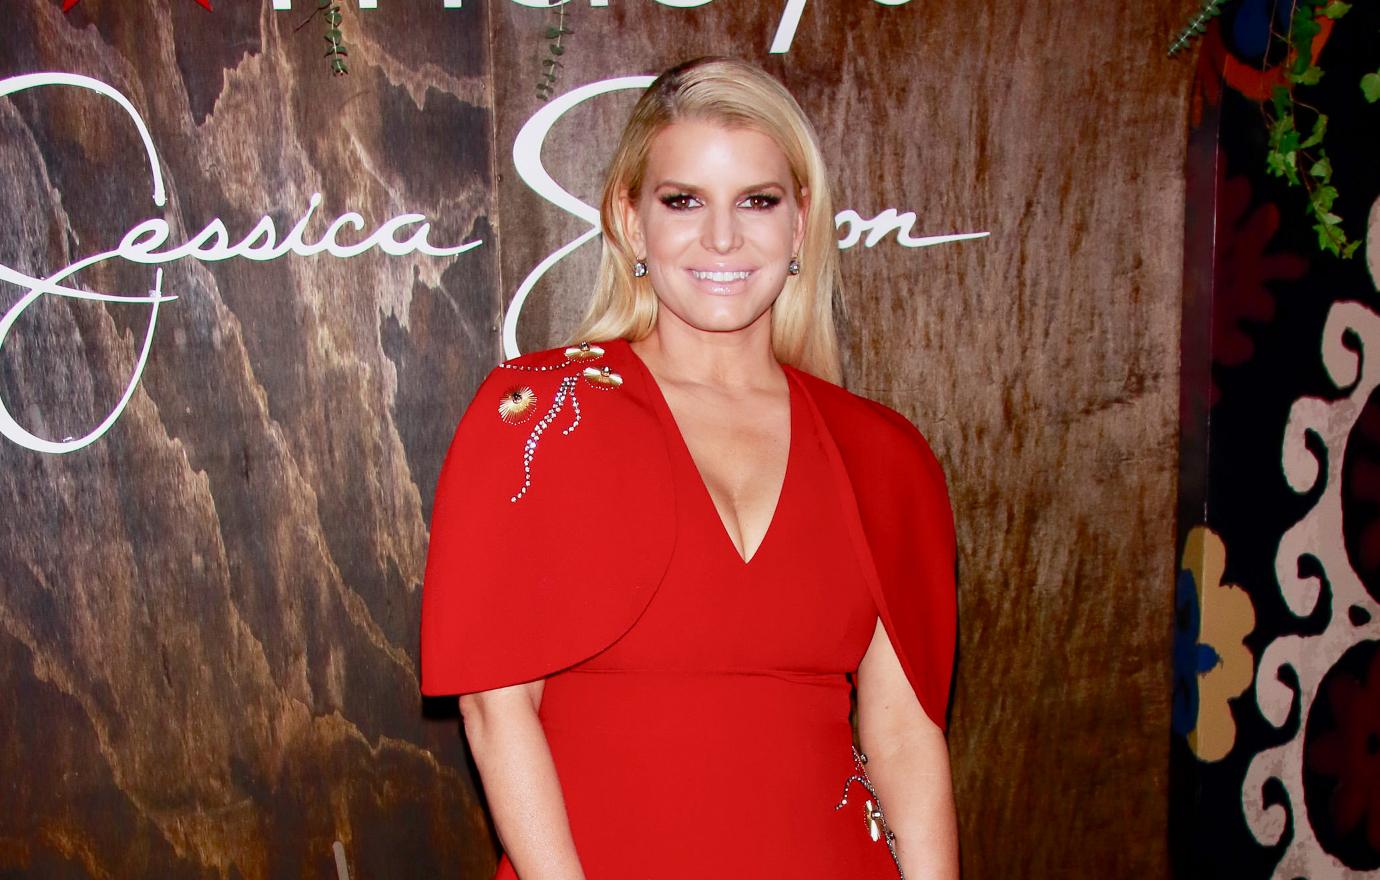 Jessica Simpson Shows Off In New Bikini Pic After 3rd 100LB Weight Loss